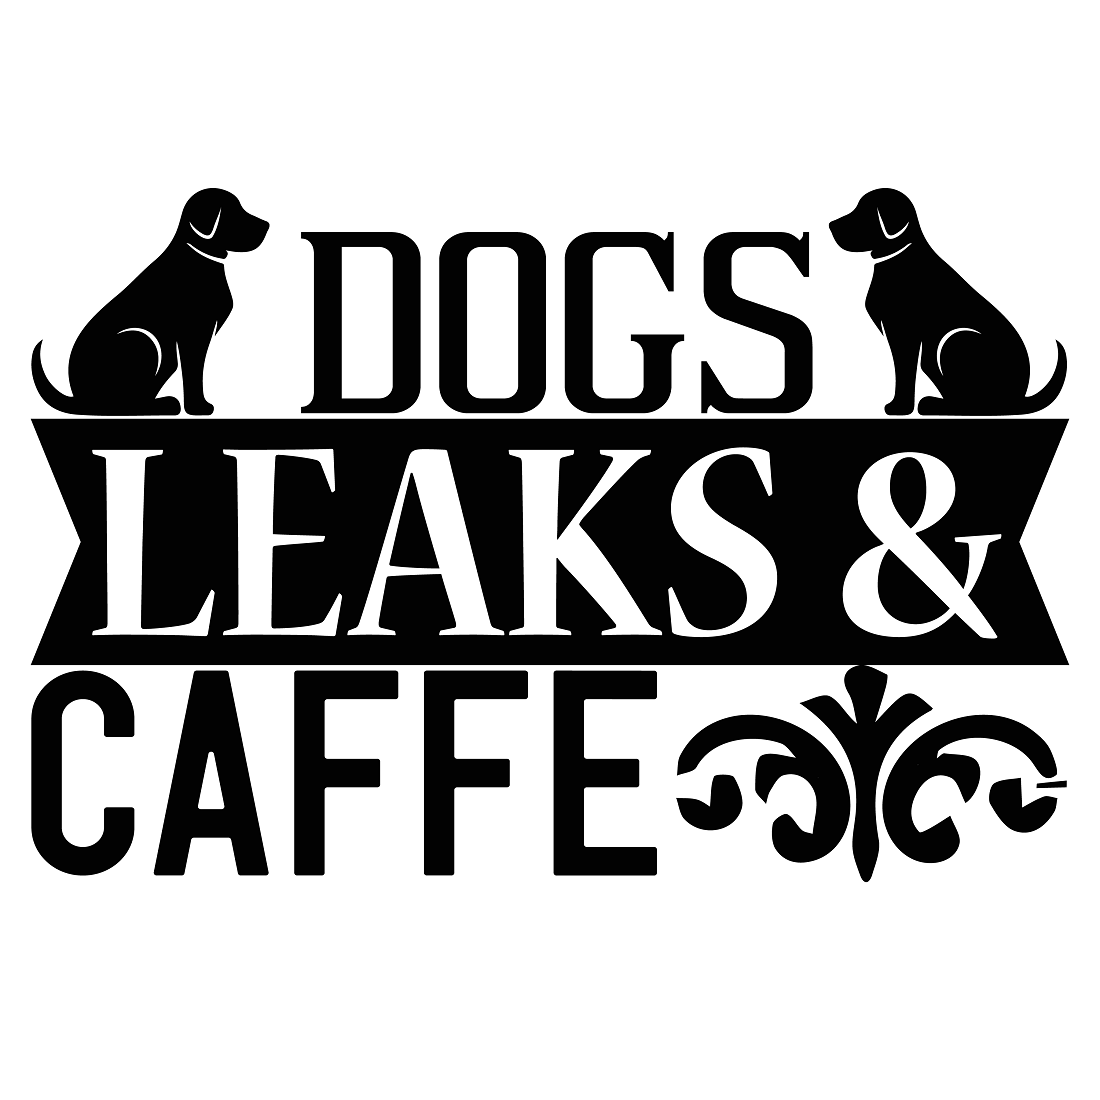 Dogs leaks and Caffe preview image.